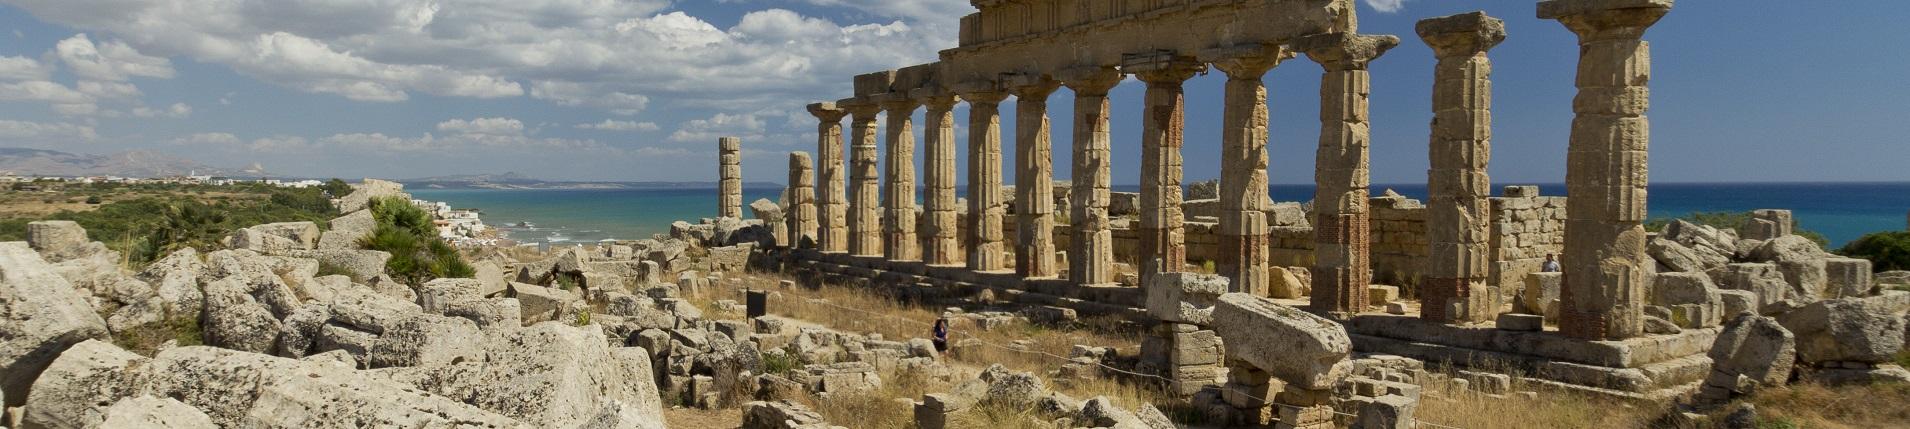 Holiday lettings and villas in Sicily for culture-seekers